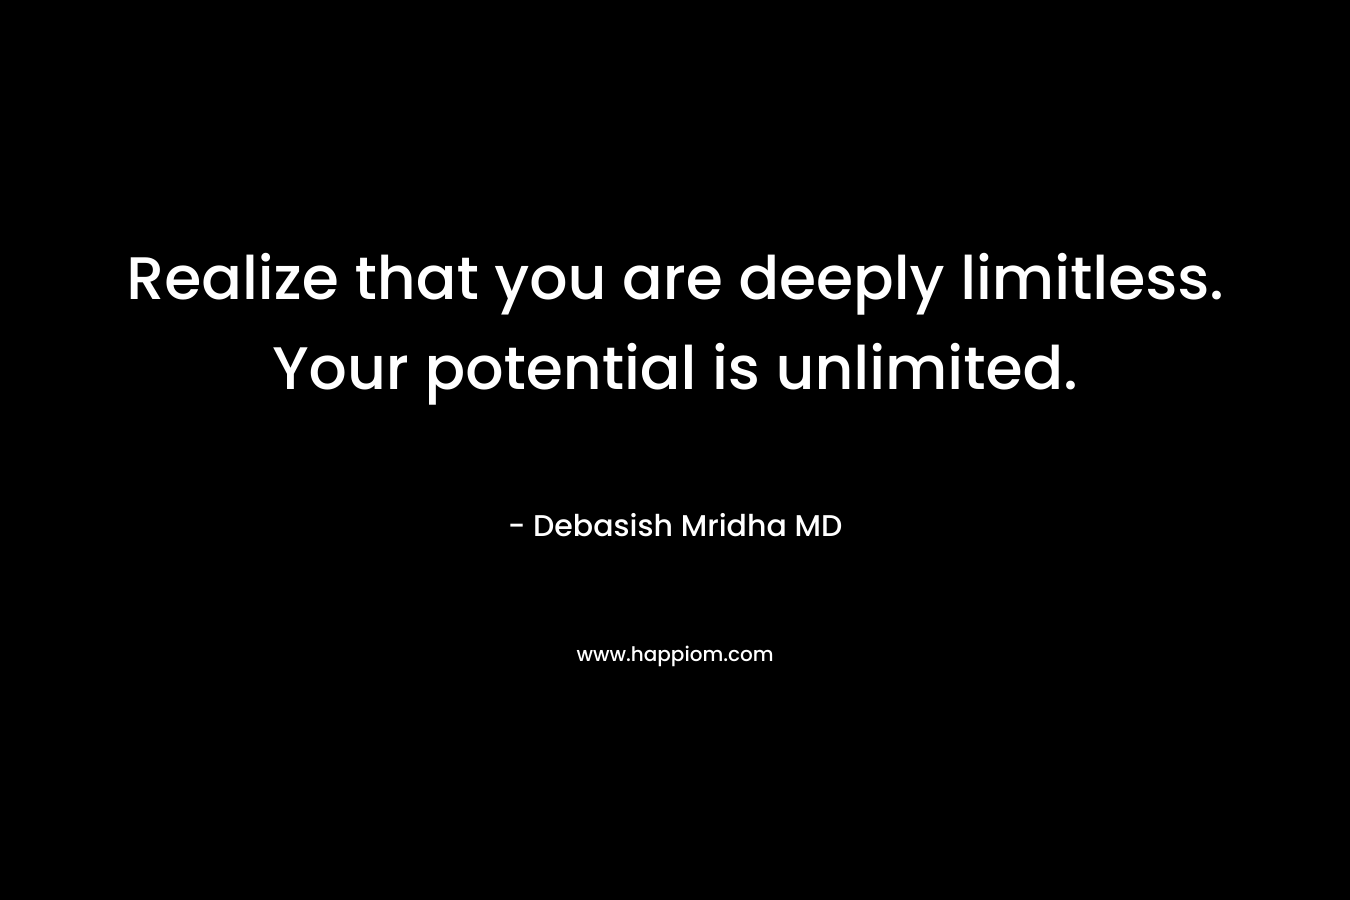 Realize that you are deeply limitless. Your potential is unlimited. – Debasish Mridha MD